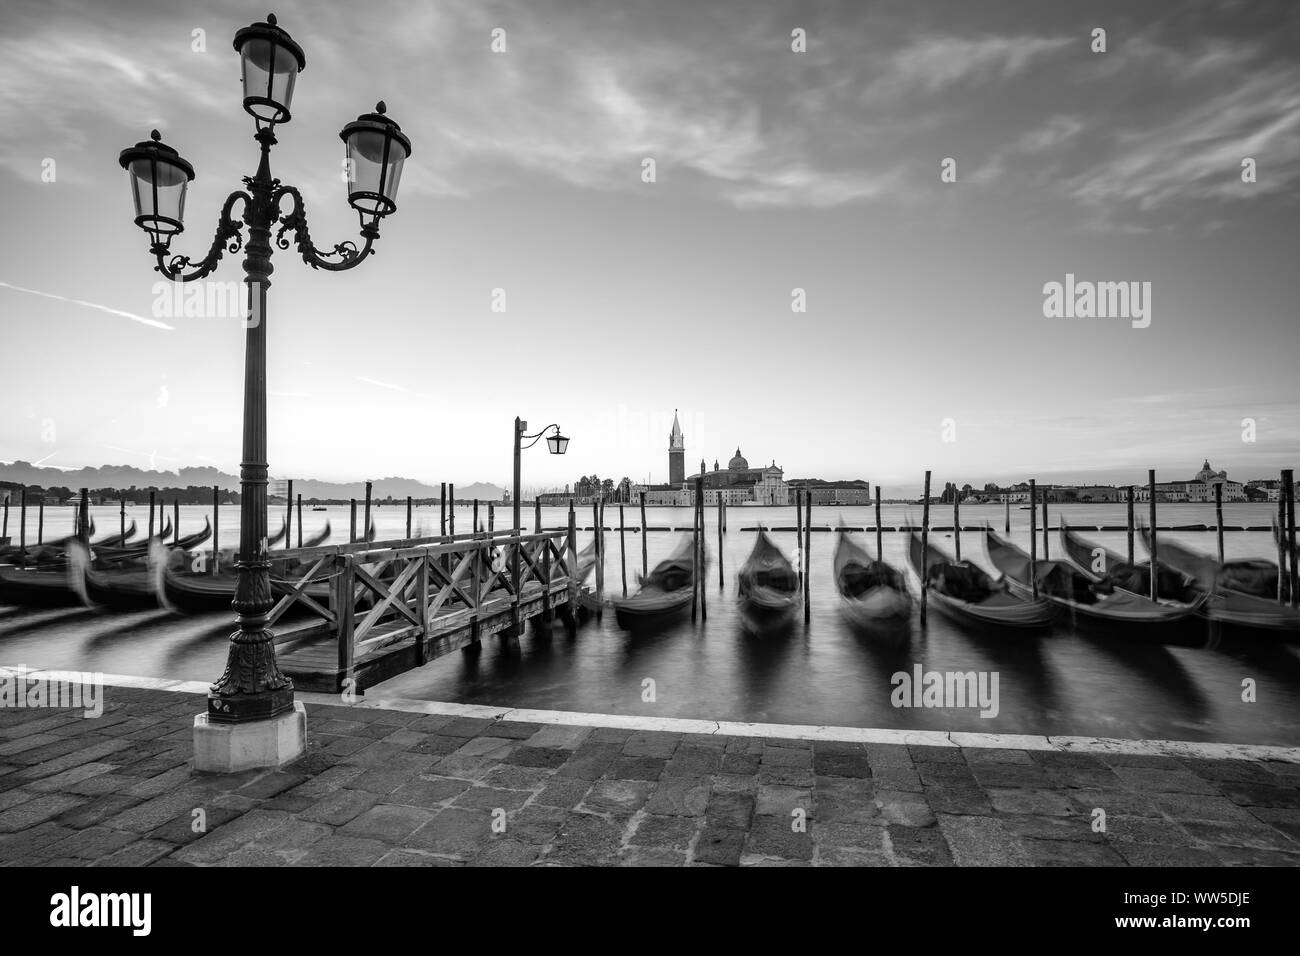 Black and White image of gondolas and the Grand Canal Venice Italy Stock Photo